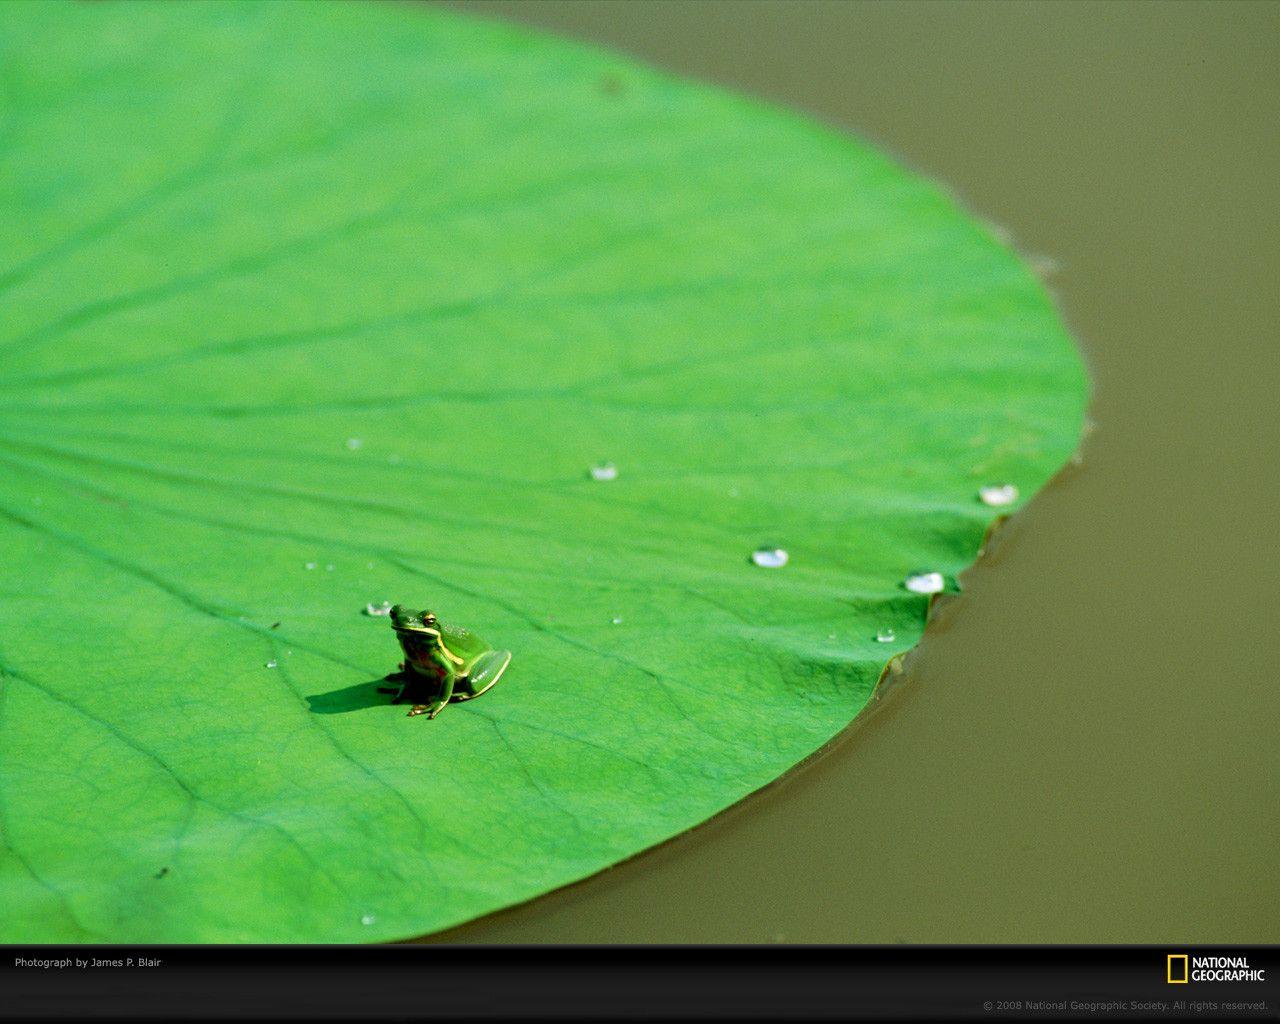 Frog on Lily Pad